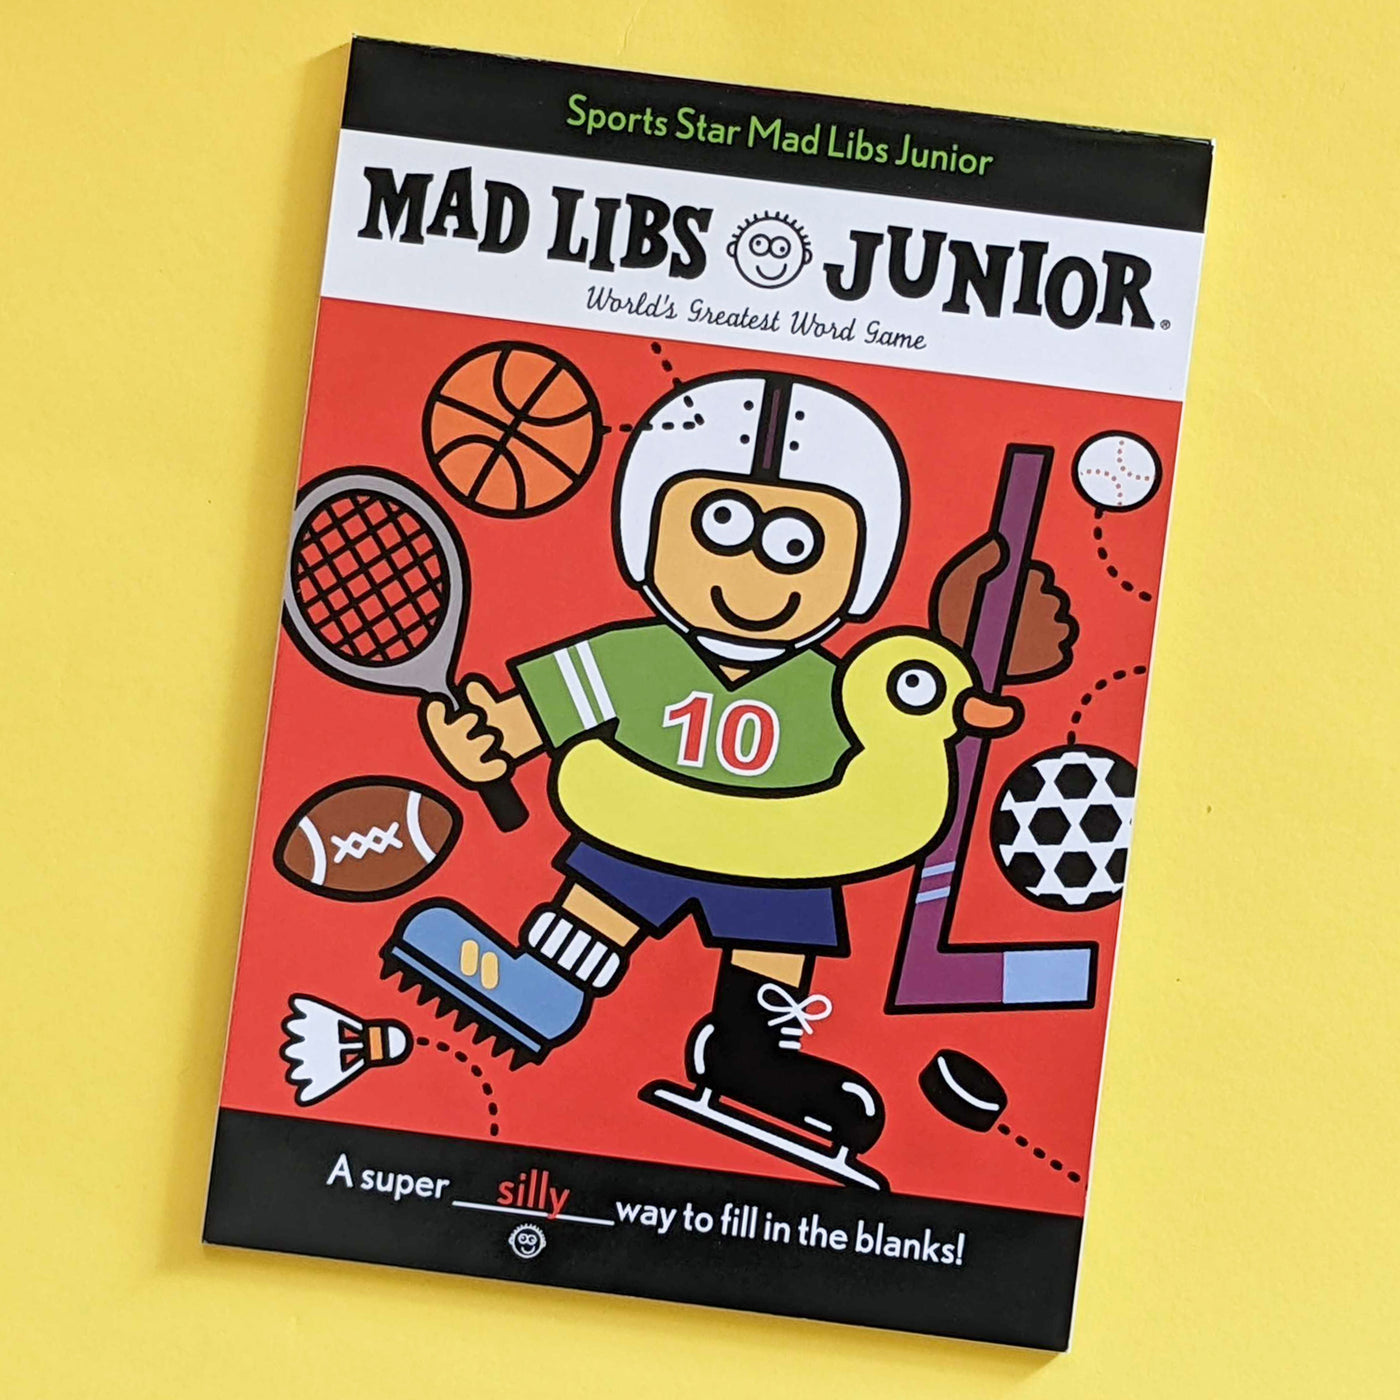 Sports Star Mad Libs Junior: World's Greatest Word Game by Roger Price